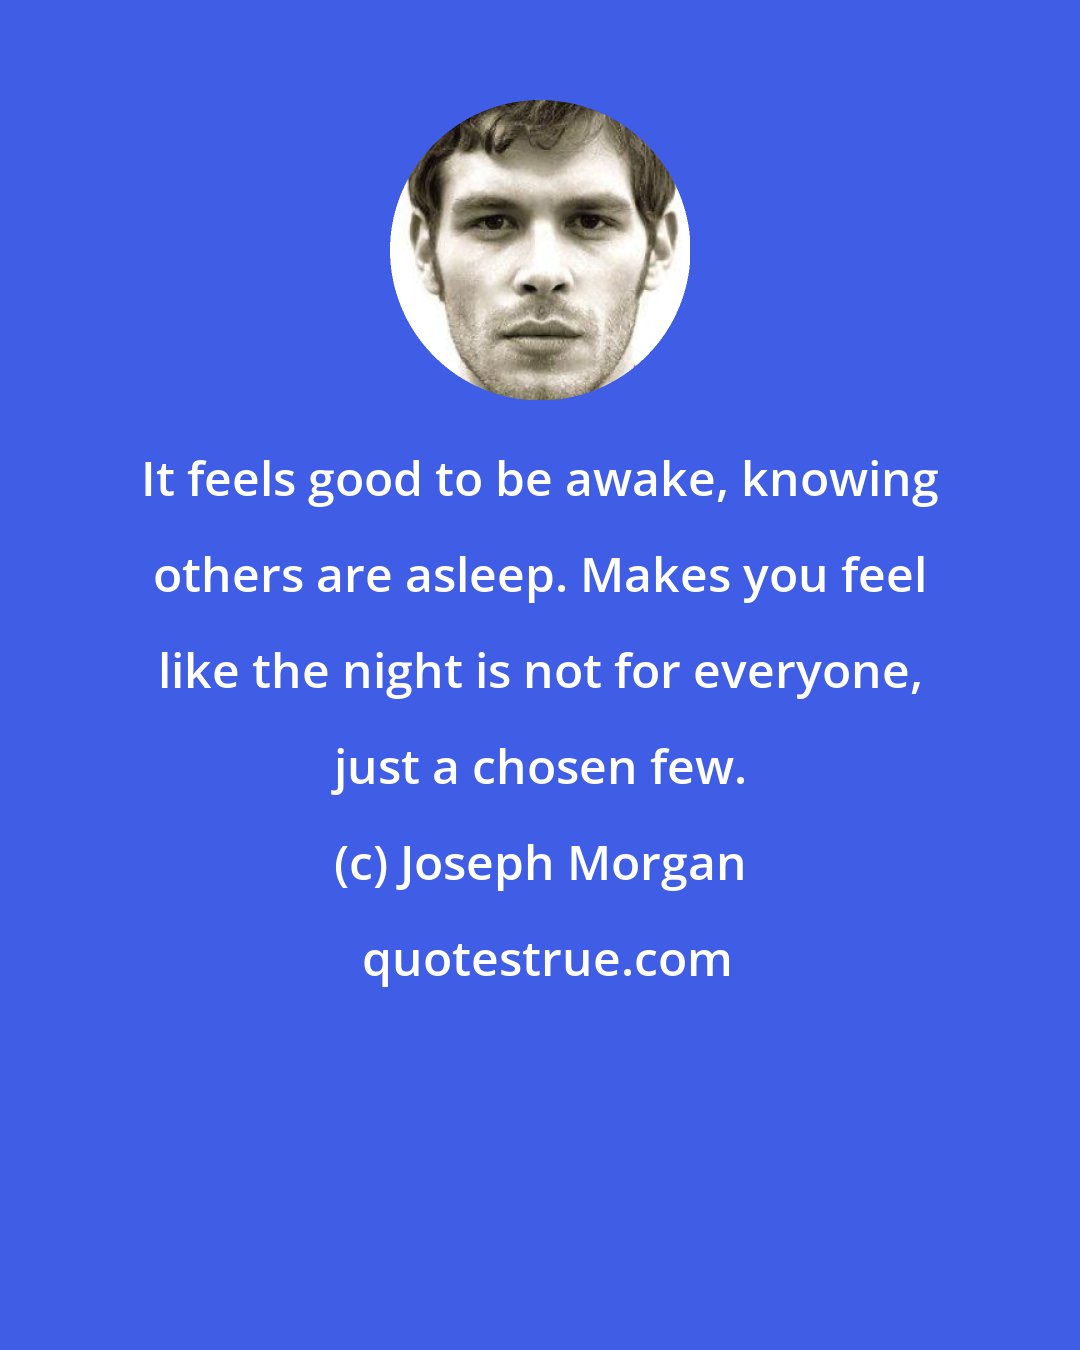 Joseph Morgan: It feels good to be awake, knowing others are asleep. Makes you feel like the night is not for everyone, just a chosen few.